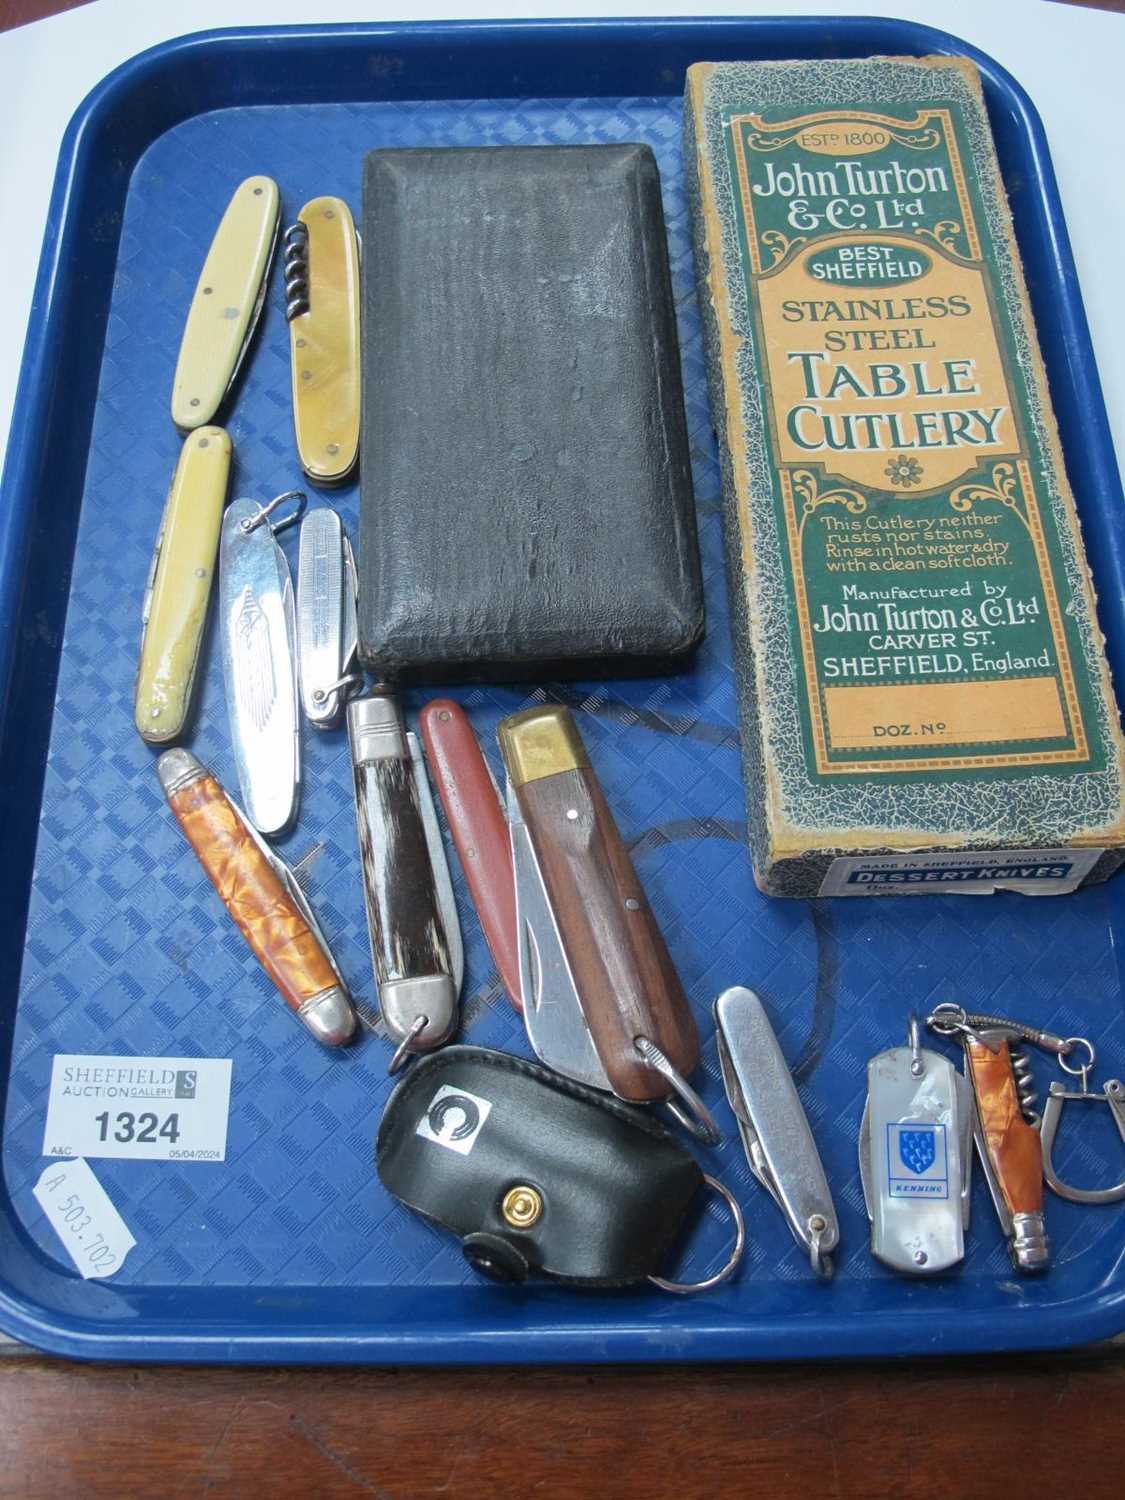 Pocket Knives, to include Rodgers, Cross Arrows. Richards (13). Geometry items, Turton table